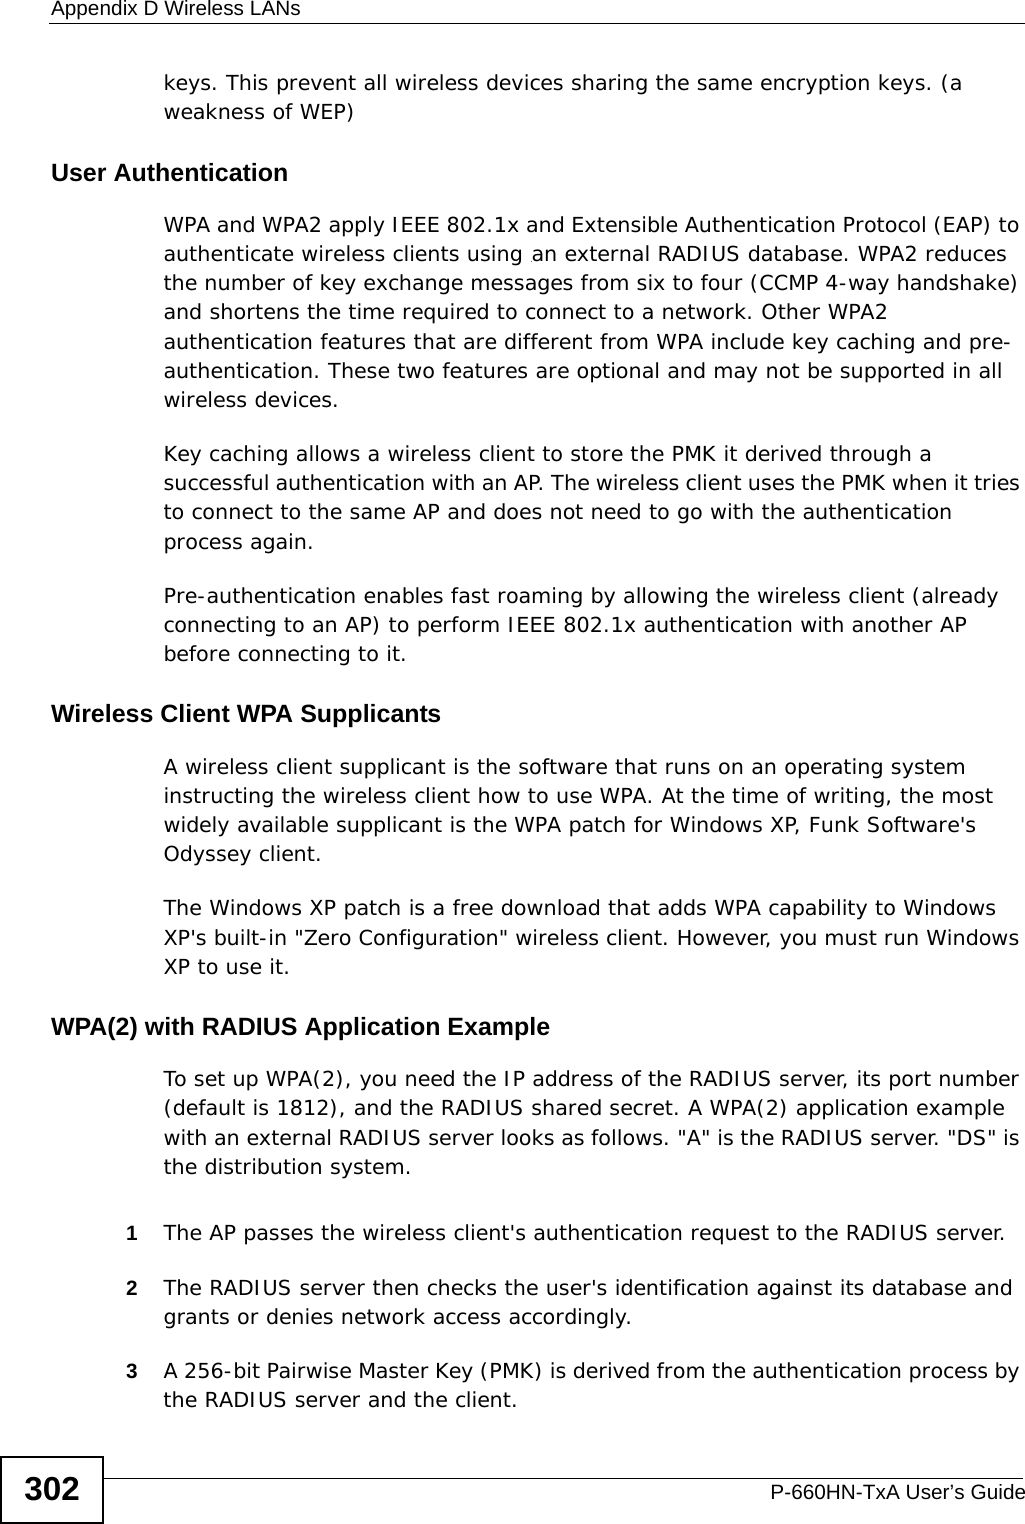 Appendix D Wireless LANsP-660HN-TxA User’s Guide302keys. This prevent all wireless devices sharing the same encryption keys. (a weakness of WEP)User Authentication WPA and WPA2 apply IEEE 802.1x and Extensible Authentication Protocol (EAP) to authenticate wireless clients using an external RADIUS database. WPA2 reduces the number of key exchange messages from six to four (CCMP 4-way handshake) and shortens the time required to connect to a network. Other WPA2 authentication features that are different from WPA include key caching and pre-authentication. These two features are optional and may not be supported in all wireless devices.Key caching allows a wireless client to store the PMK it derived through a successful authentication with an AP. The wireless client uses the PMK when it tries to connect to the same AP and does not need to go with the authentication process again.Pre-authentication enables fast roaming by allowing the wireless client (already connecting to an AP) to perform IEEE 802.1x authentication with another AP before connecting to it.Wireless Client WPA SupplicantsA wireless client supplicant is the software that runs on an operating system instructing the wireless client how to use WPA. At the time of writing, the most widely available supplicant is the WPA patch for Windows XP, Funk Software&apos;s Odyssey client. The Windows XP patch is a free download that adds WPA capability to Windows XP&apos;s built-in &quot;Zero Configuration&quot; wireless client. However, you must run Windows XP to use it. WPA(2) with RADIUS Application ExampleTo set up WPA(2), you need the IP address of the RADIUS server, its port number (default is 1812), and the RADIUS shared secret. A WPA(2) application example with an external RADIUS server looks as follows. &quot;A&quot; is the RADIUS server. &quot;DS&quot; is the distribution system.1The AP passes the wireless client&apos;s authentication request to the RADIUS server.2The RADIUS server then checks the user&apos;s identification against its database and grants or denies network access accordingly.3A 256-bit Pairwise Master Key (PMK) is derived from the authentication process by the RADIUS server and the client.